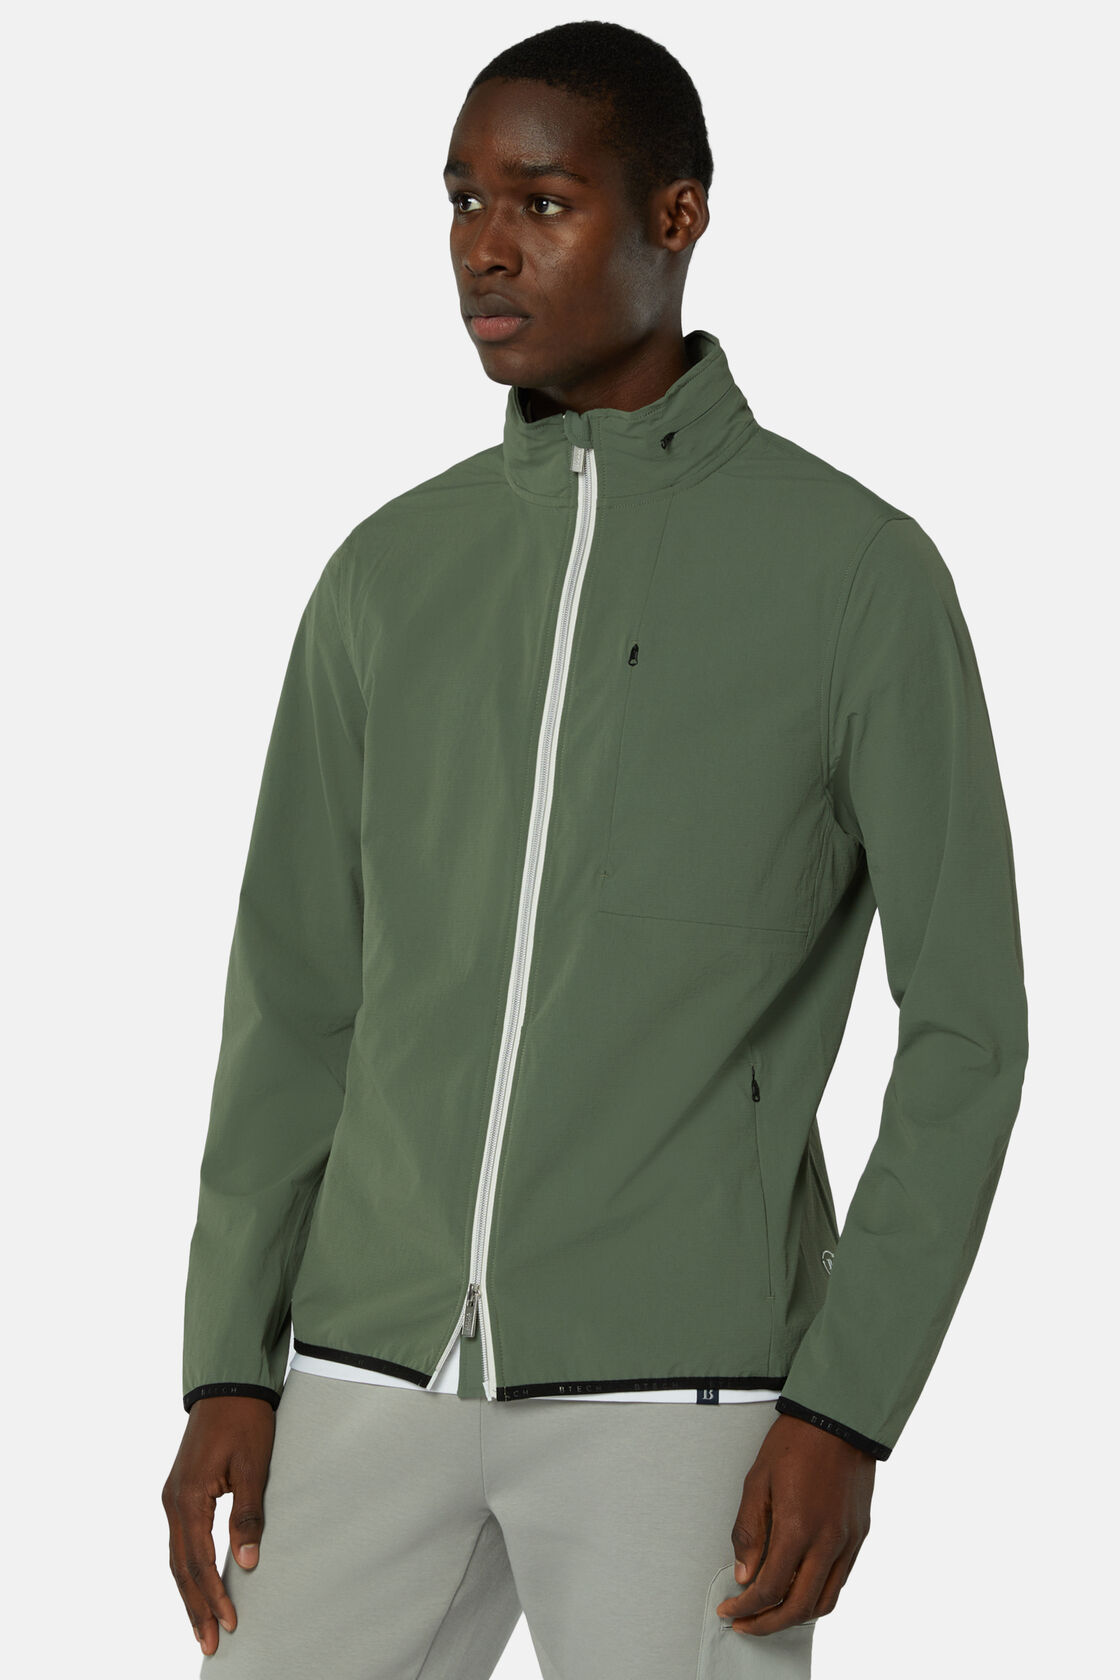 Padded jacket in B-Tech Recycled Stretch Nylon, Green, hi-res